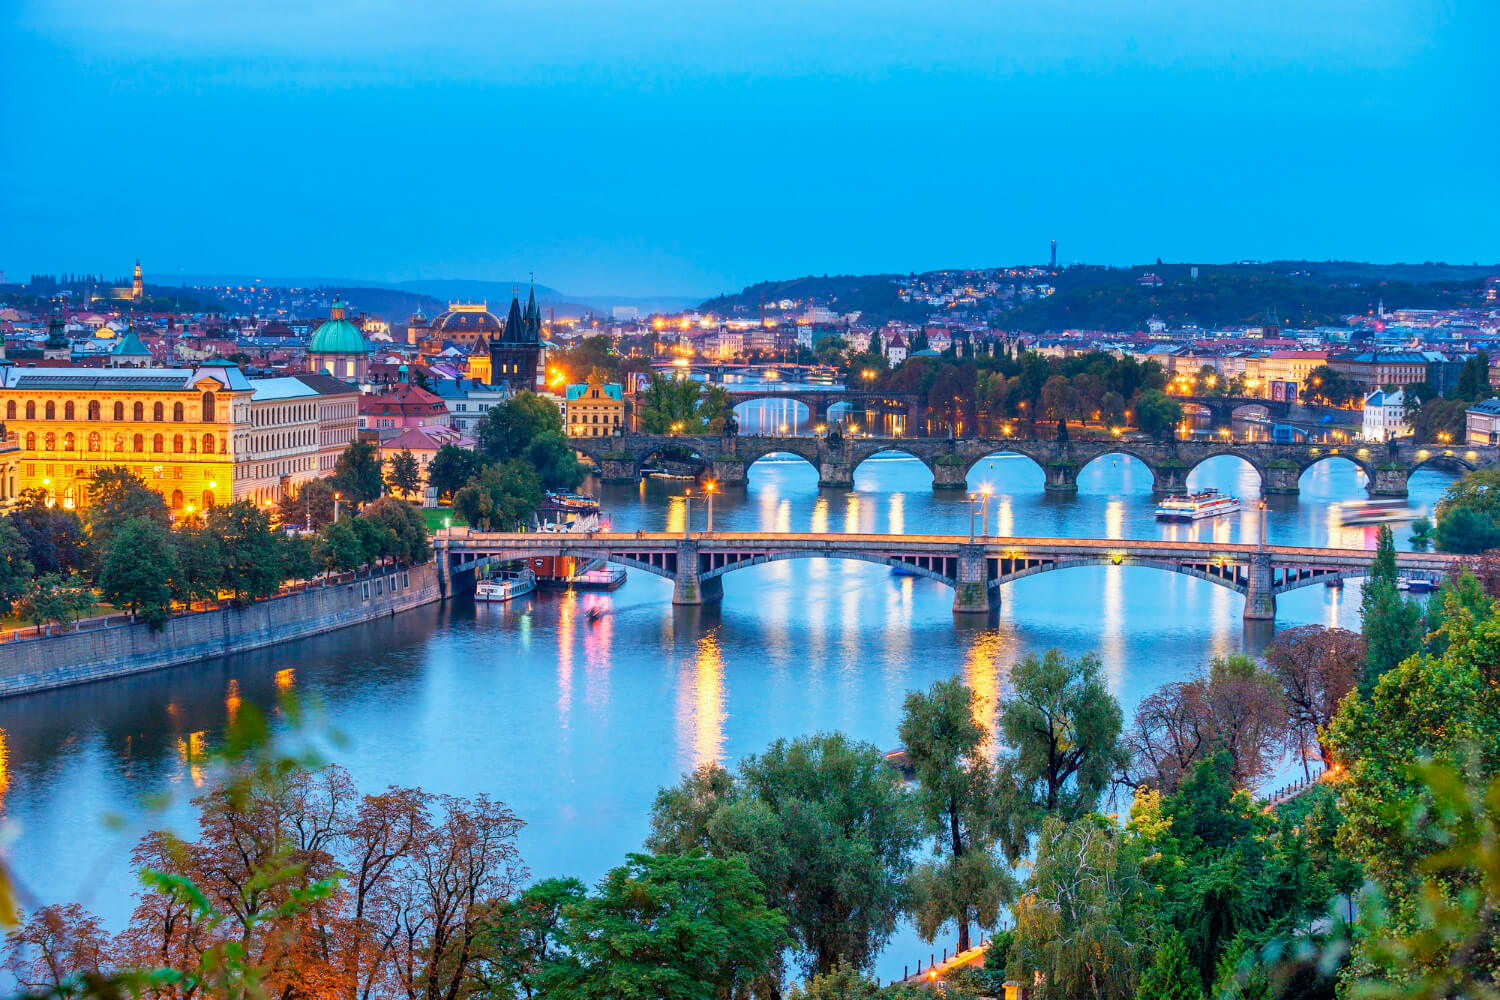 What families, Couples, & friends can enjoy in Prague